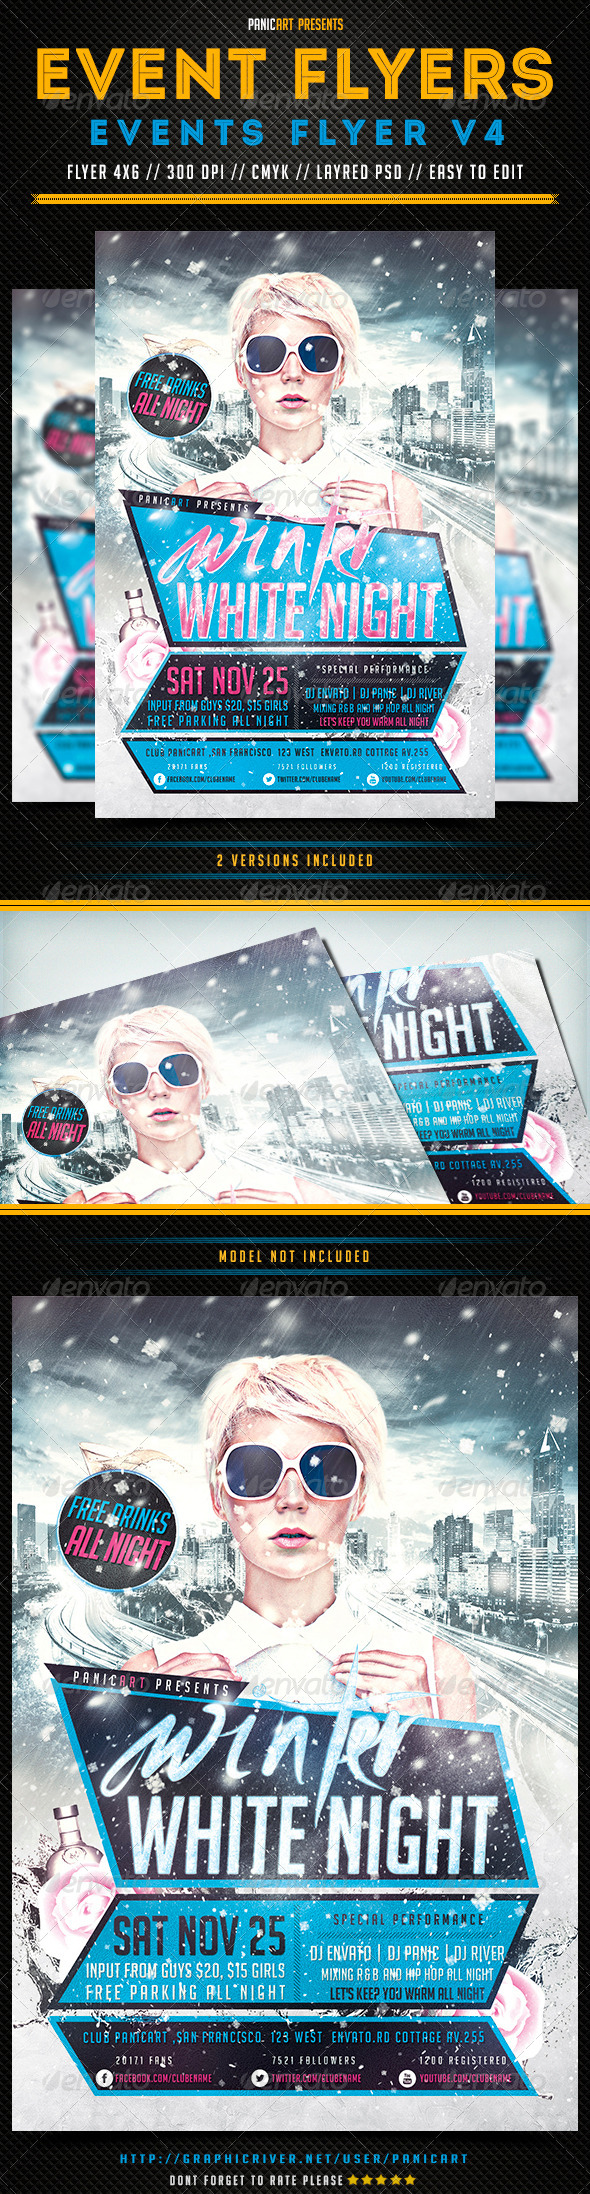 Event Flyers PSD Template V4 (Flyers)